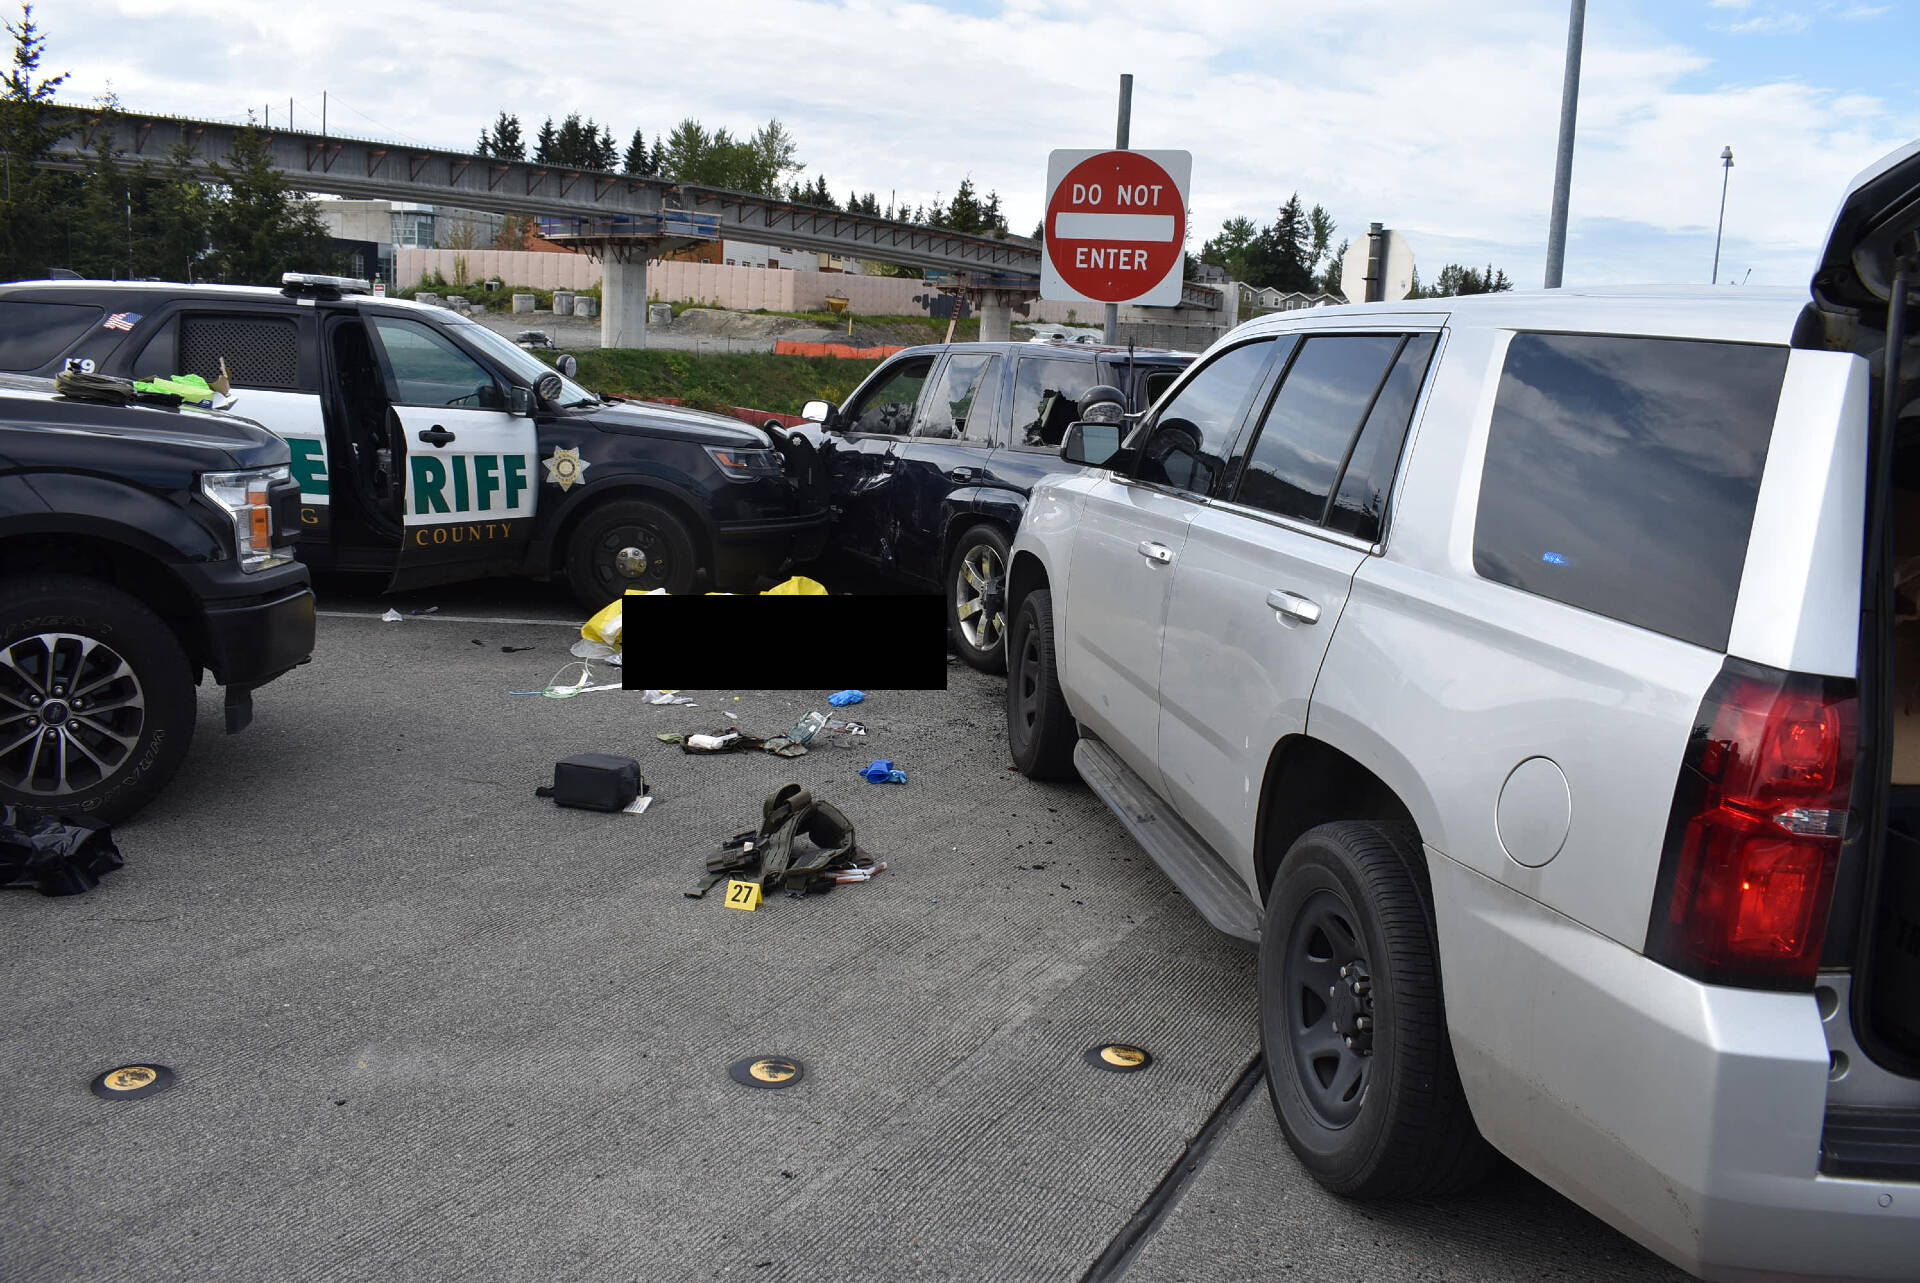 Cicero Sanchez, 31, lays dead at the scene near South 317th Street and 28 Avenue South after two King County Sheriff’s Office deputies shot him following a vehicle pursuit on May 4, 2022. Multiple vehicles, both unmarked and marked, surround Sanchez’s vehicle. A King County Sheriff’s Office vehicle pins the driver’s door of Sanchez’s vehicle shut with the window half open. The original family liaison for the Sanchez family, Douglas Faini, said in an email that Sanchez climbed out of the open window. Sanchez’s body has been censored with a black box by this newspaper’s editorial staff. (Photo courtesy of Cristy Sanchez)